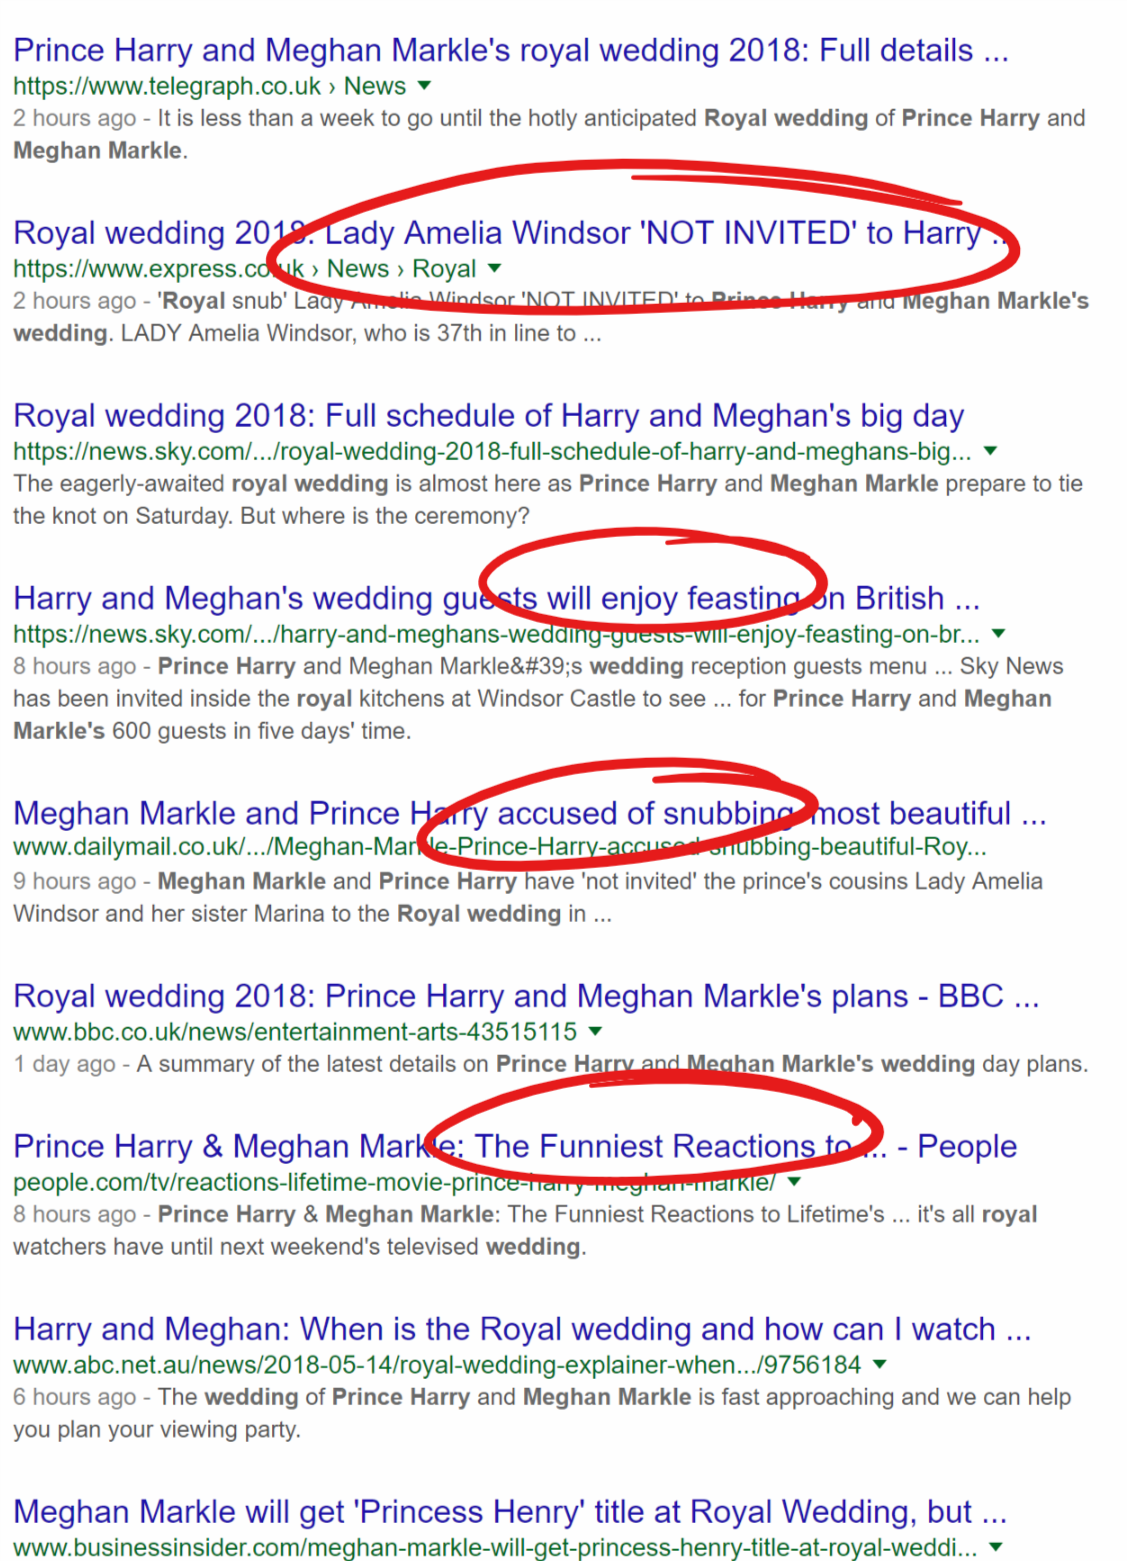 Royal wedding, opinions based as fact, fact almost, opinion headlines